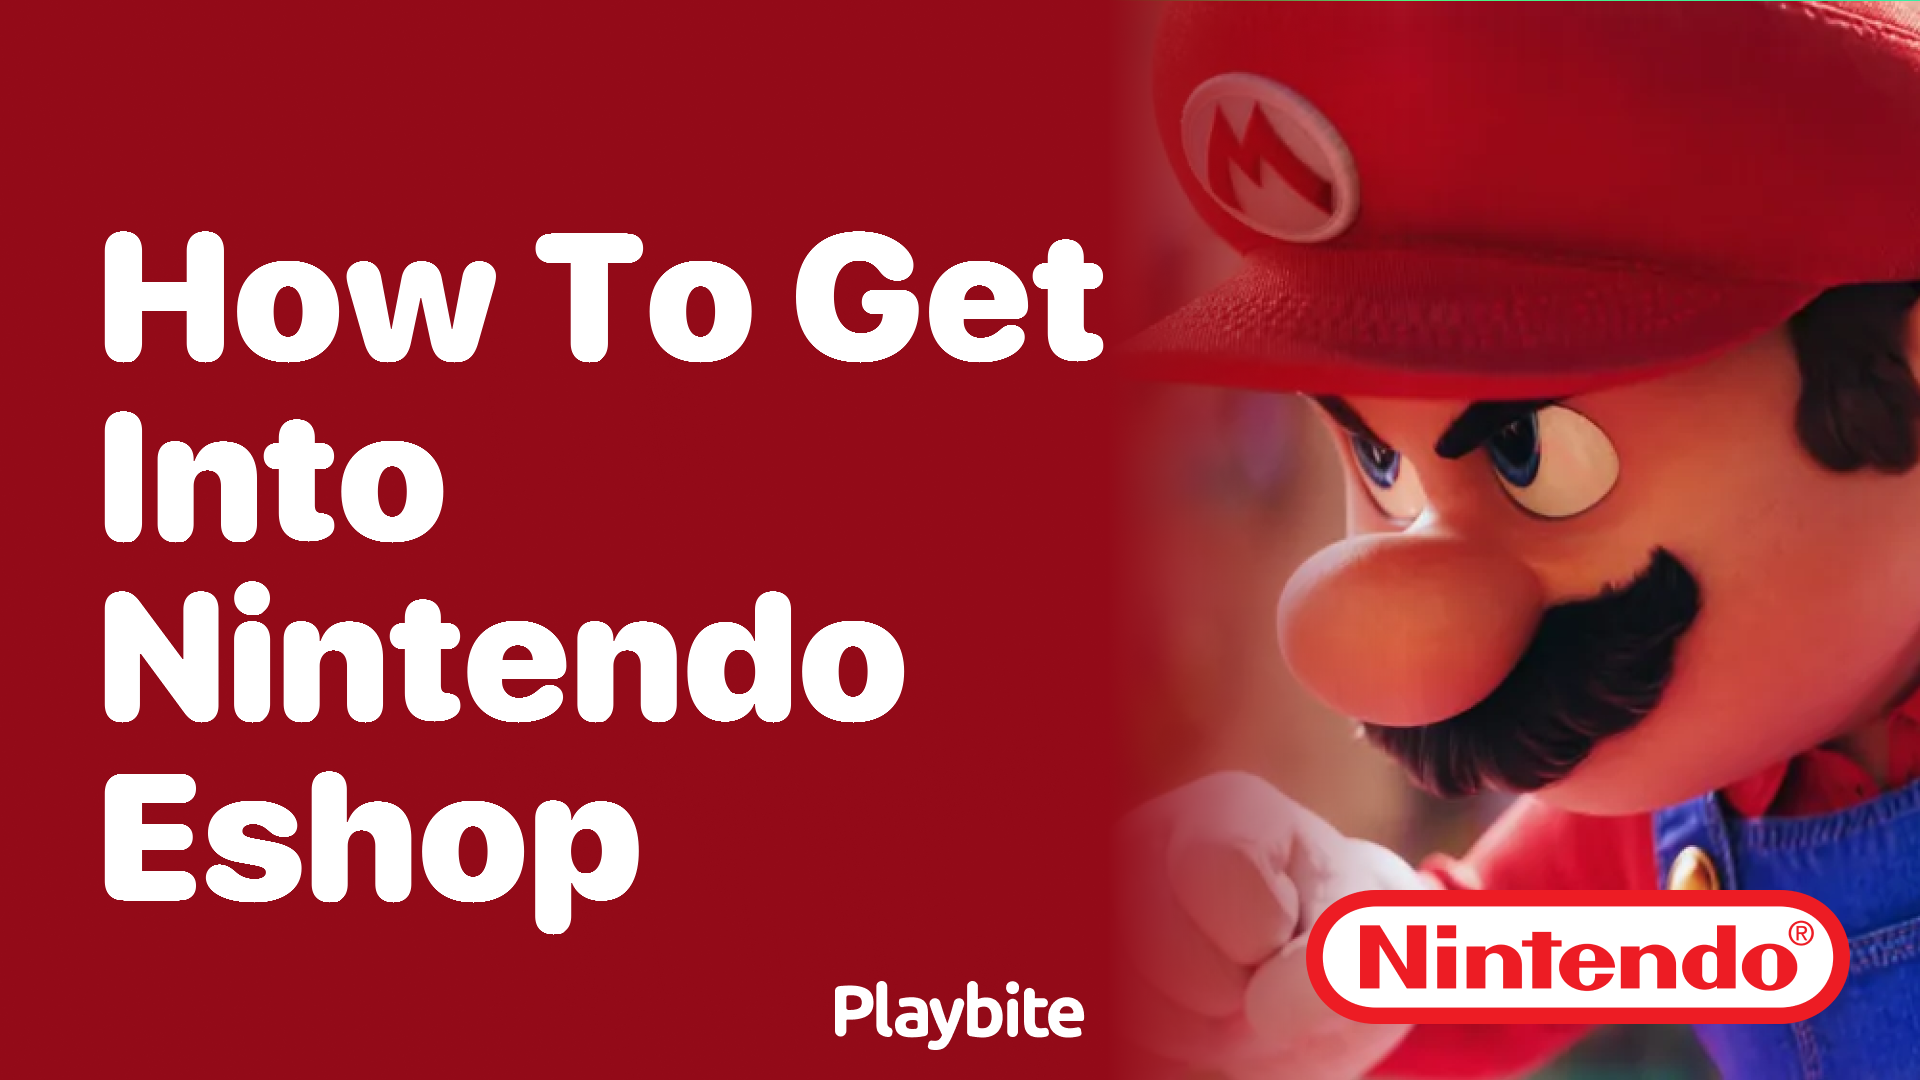 How to Access the Nintendo eShop: A Quick Guide